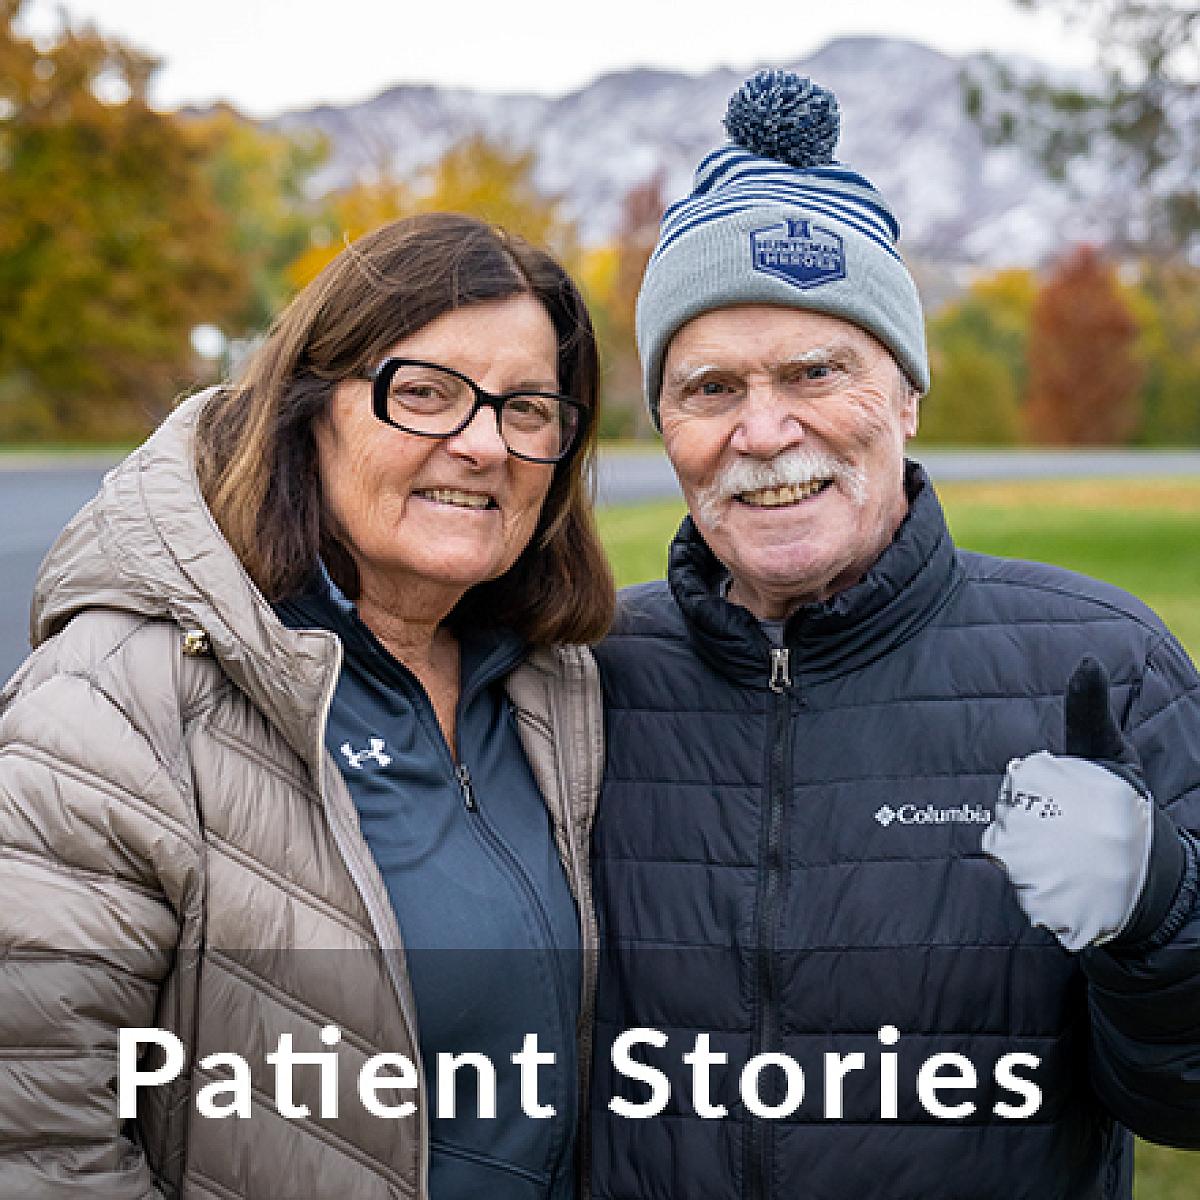 Senior couple smile at camera with the an overlay of the text "Patient Stories"